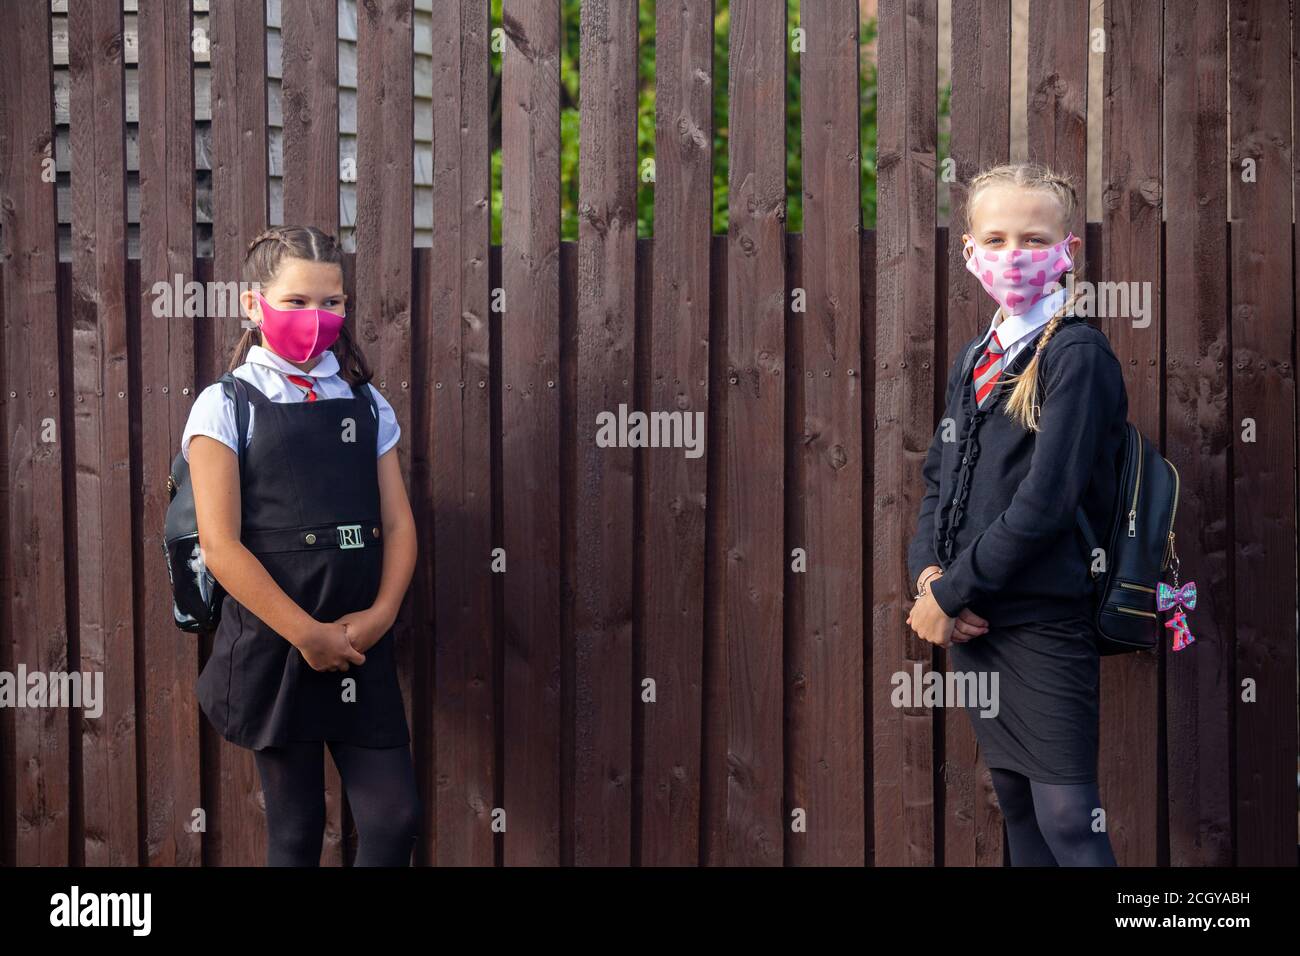 Two 10 year old schoolgirls wearing school uniforms and face masks and standing next to a wooden fence Stock Photo